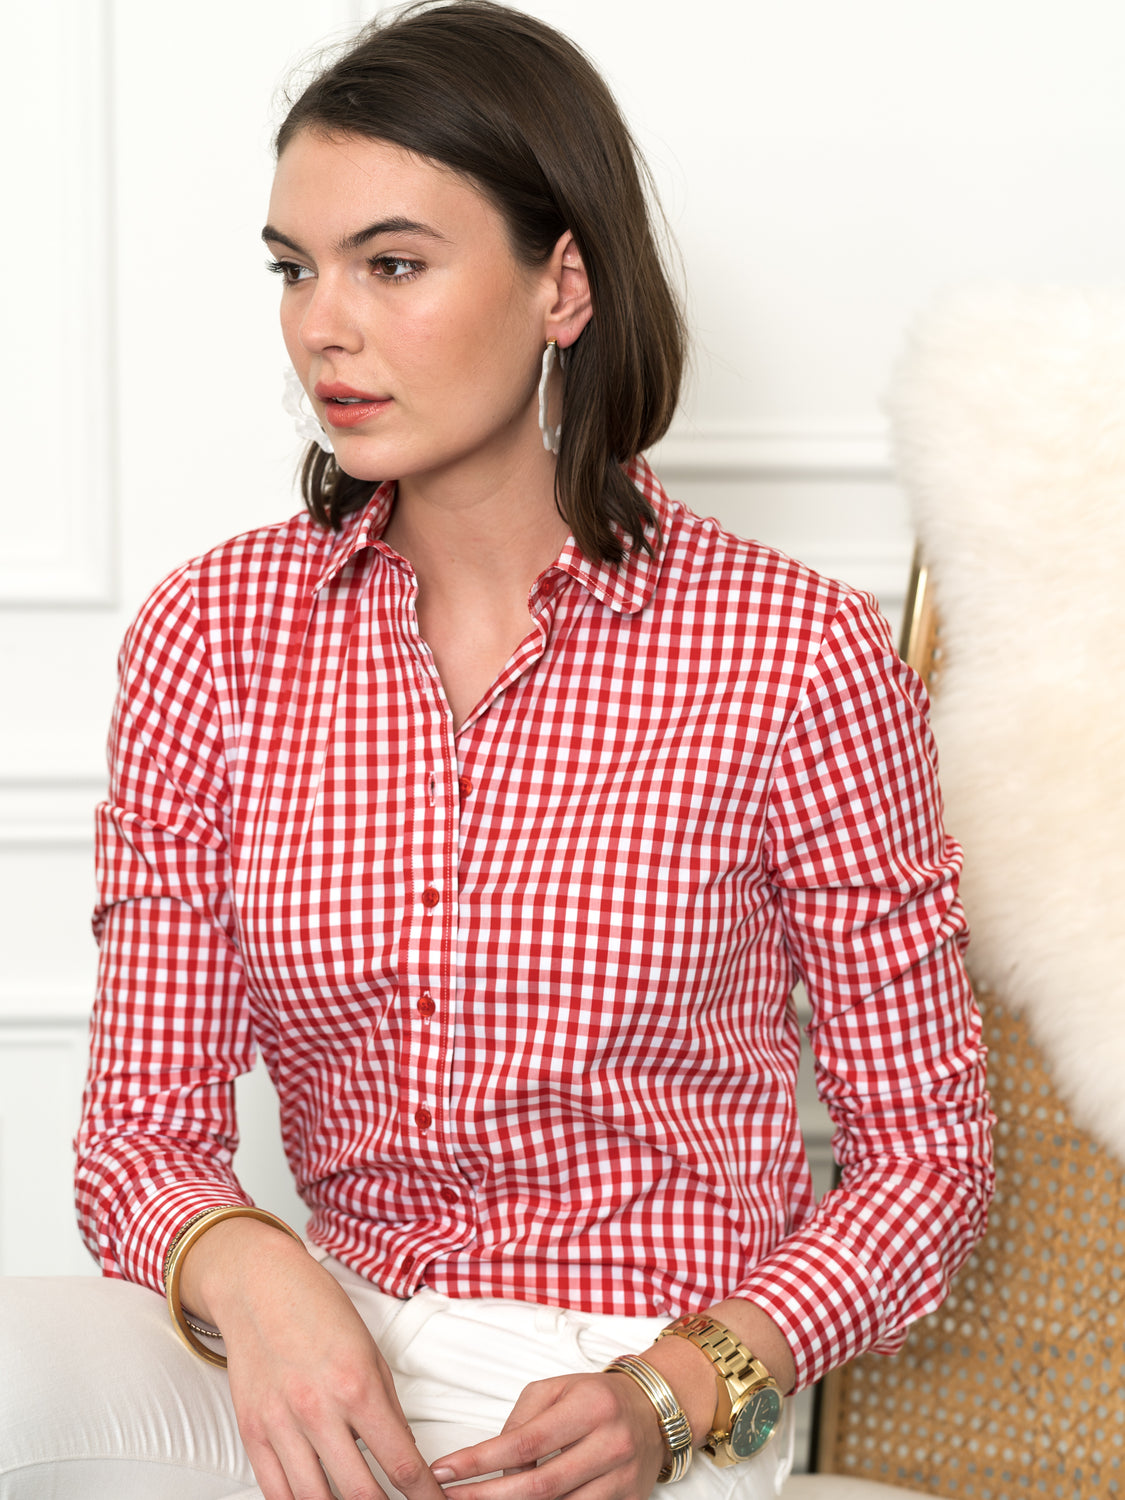 women's red shirt with collar